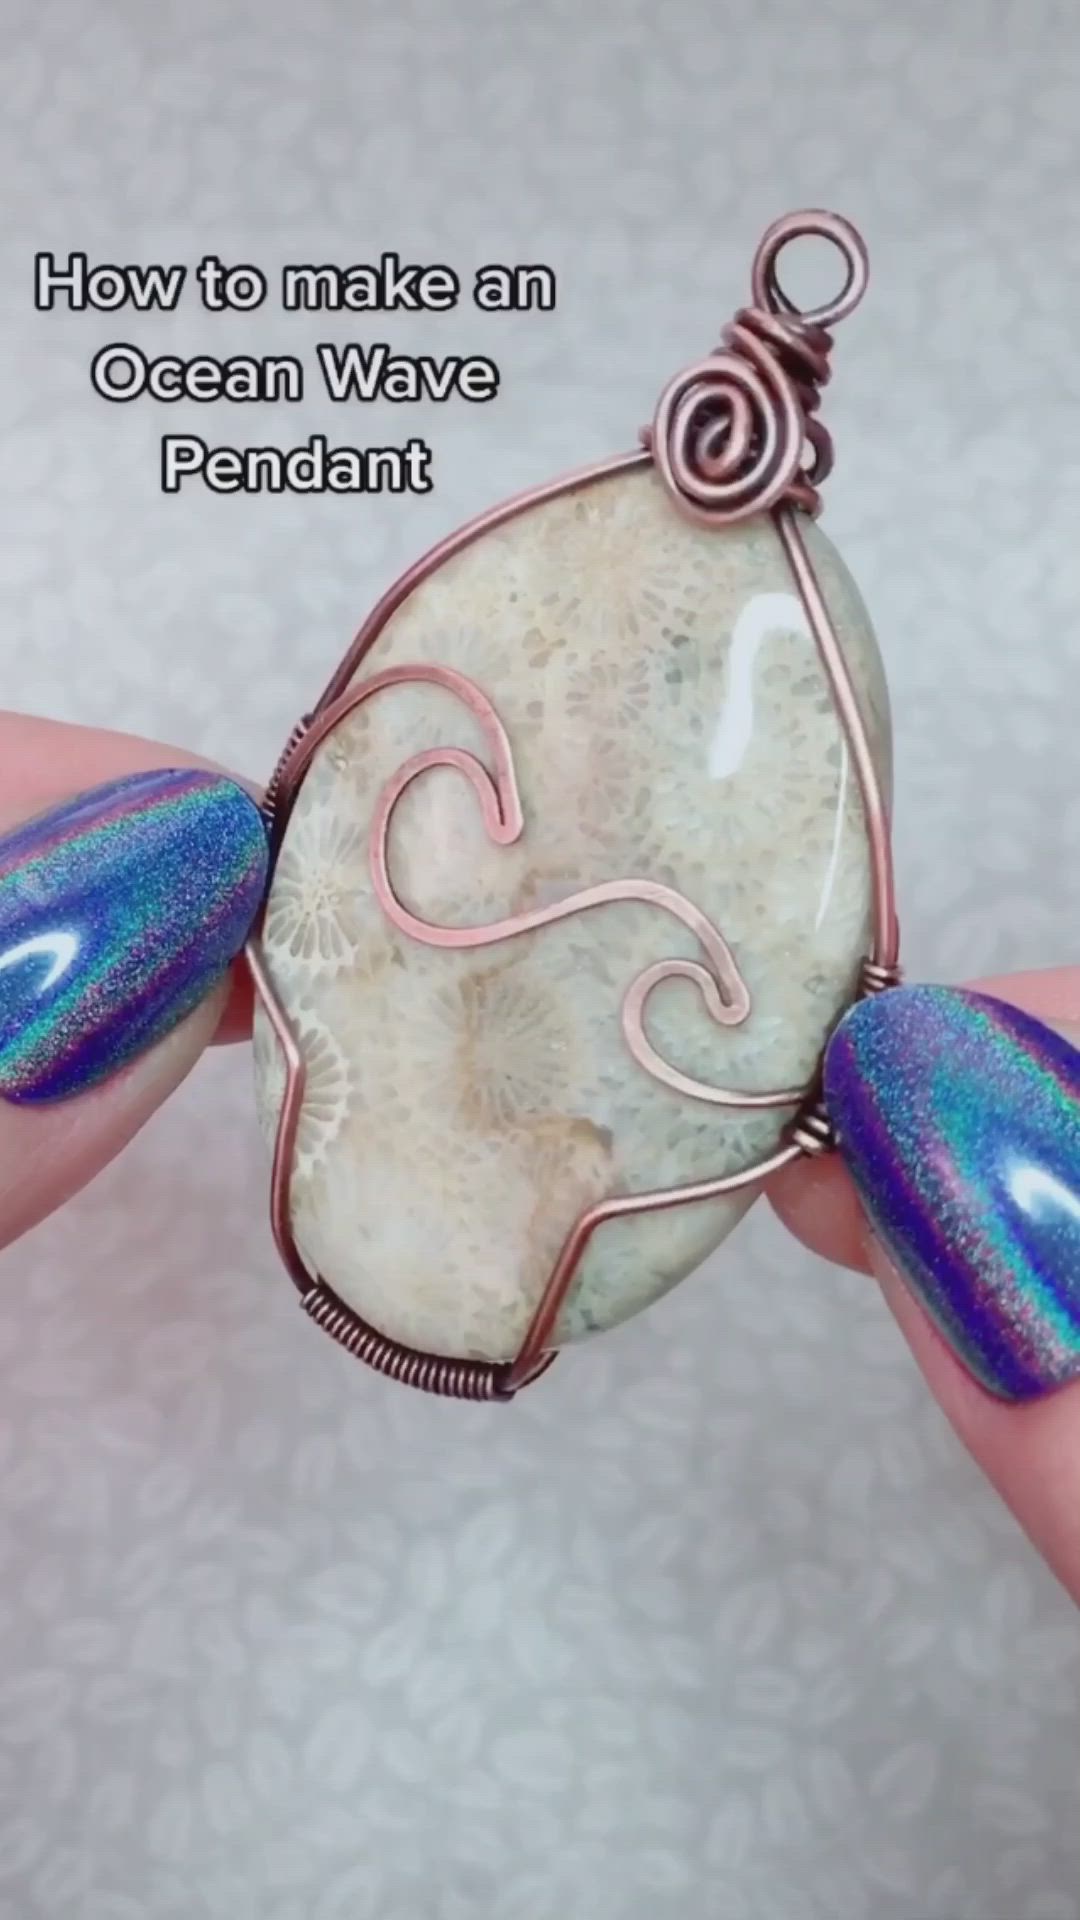 This may contain: a person holding a wire wrapped pendant with blue and white designs on it's face